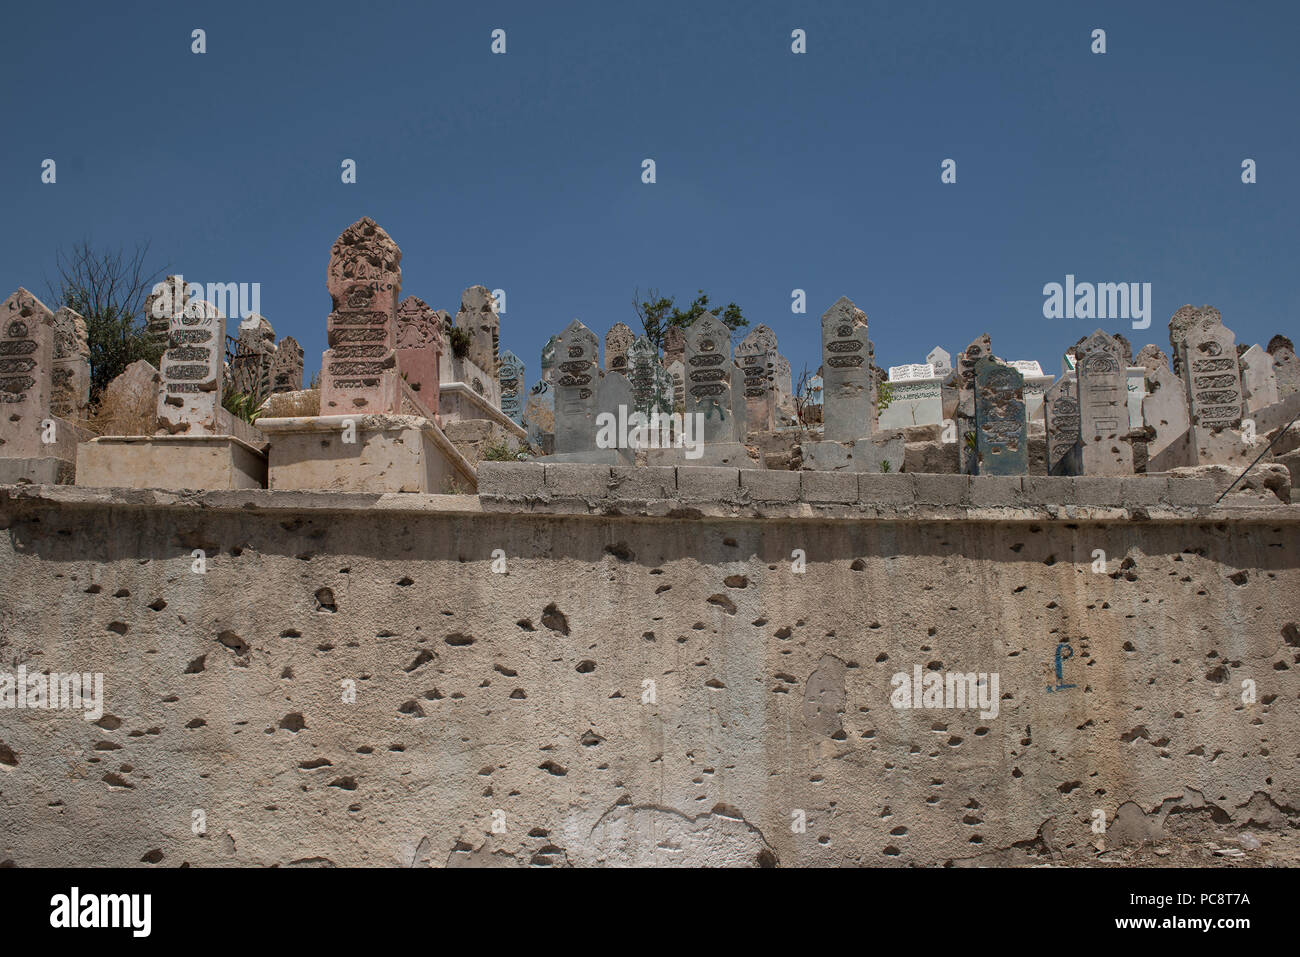 A Cemetery  damaged in old Aleppo in 2017 in war Stock Photo